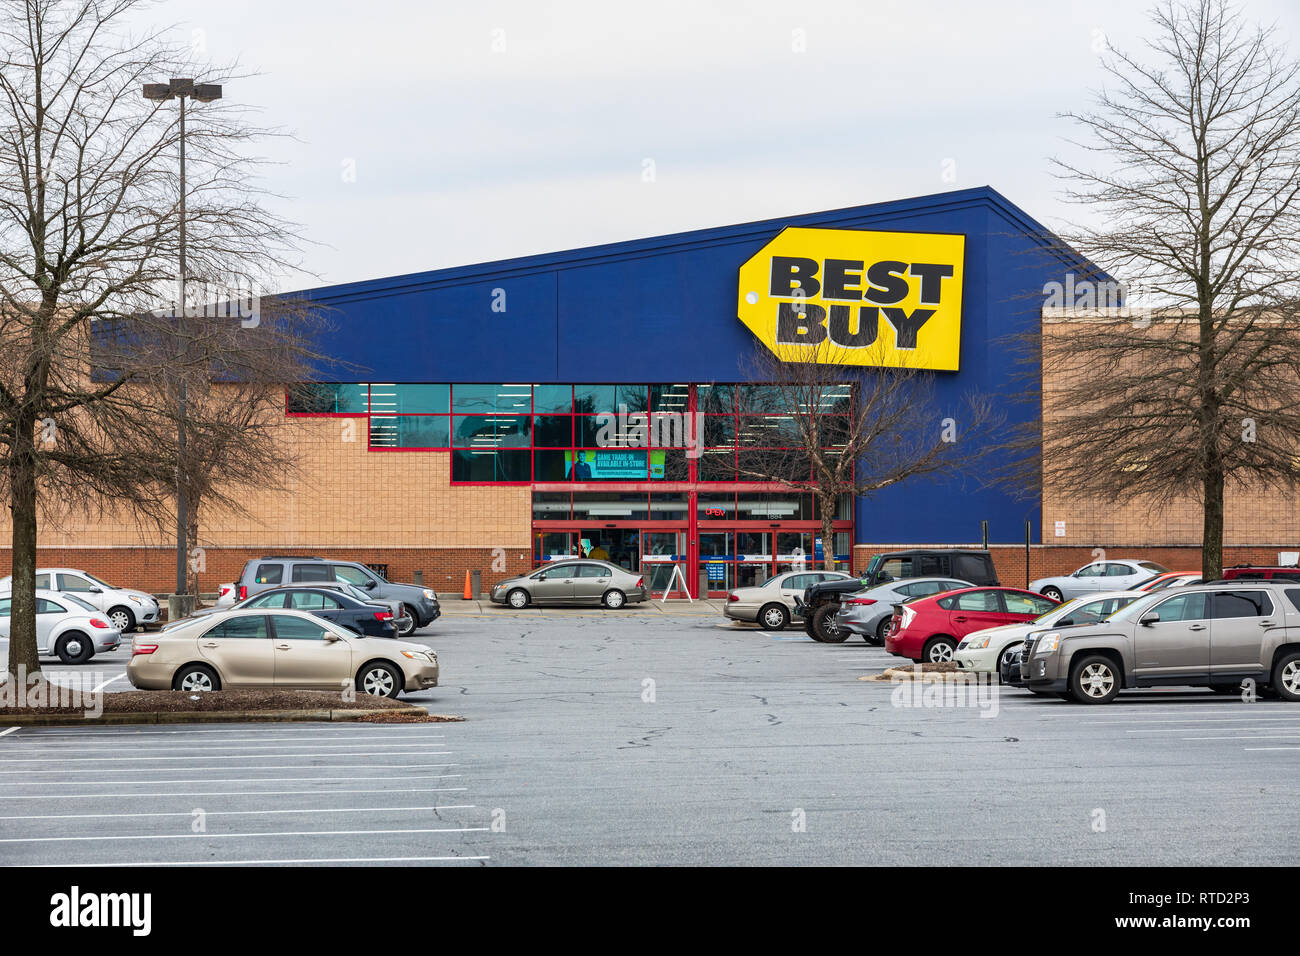 HICKORY, NC, USA-2/28/19: A Best Buy retail store, with cars in parking lot.  No people. Stock Photo